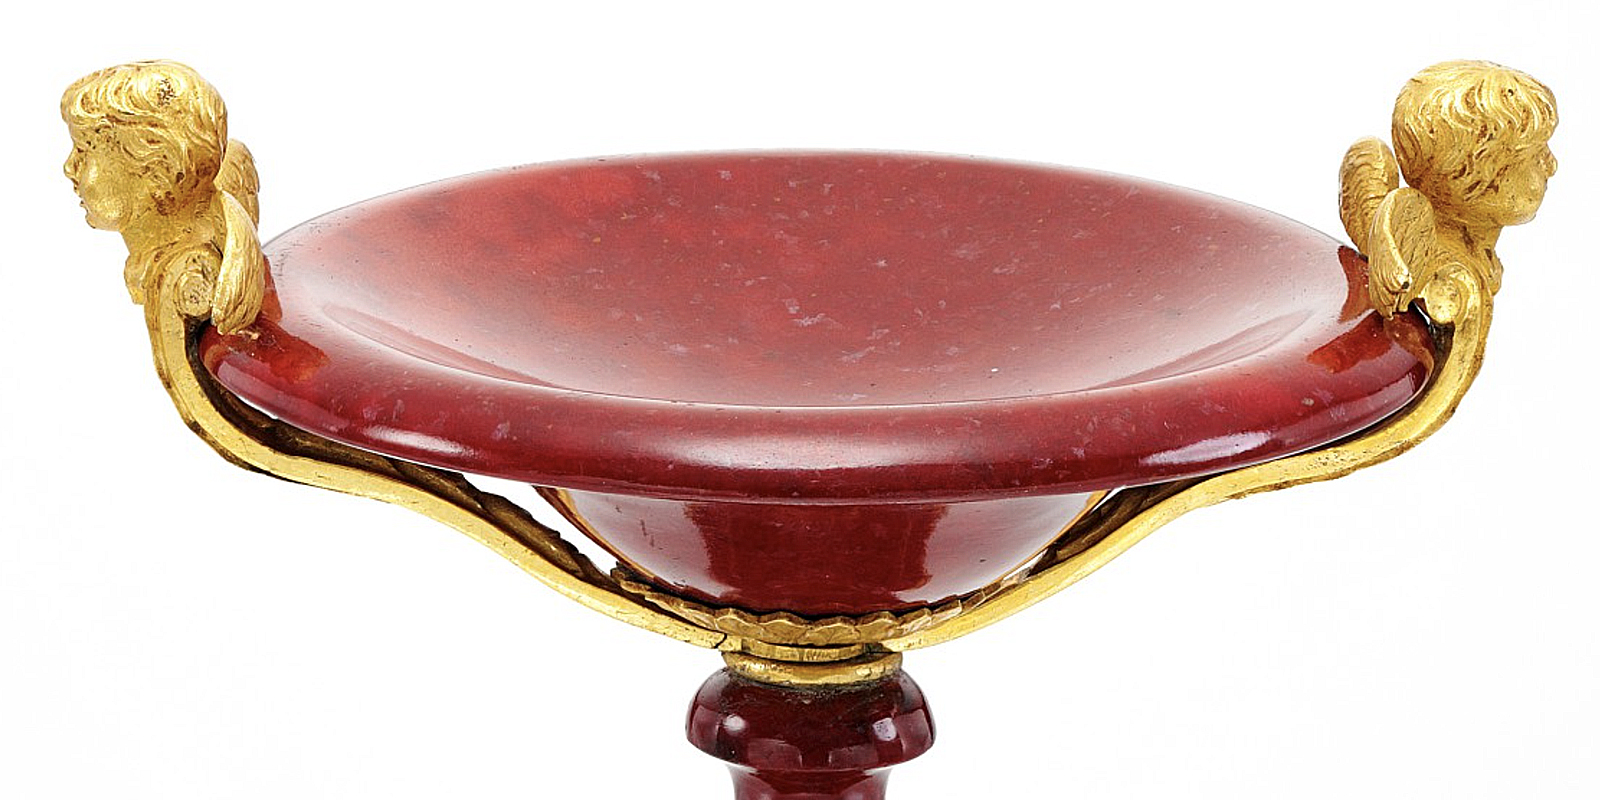 The Brooklyn Museum Collection of Faberge up for Grabs